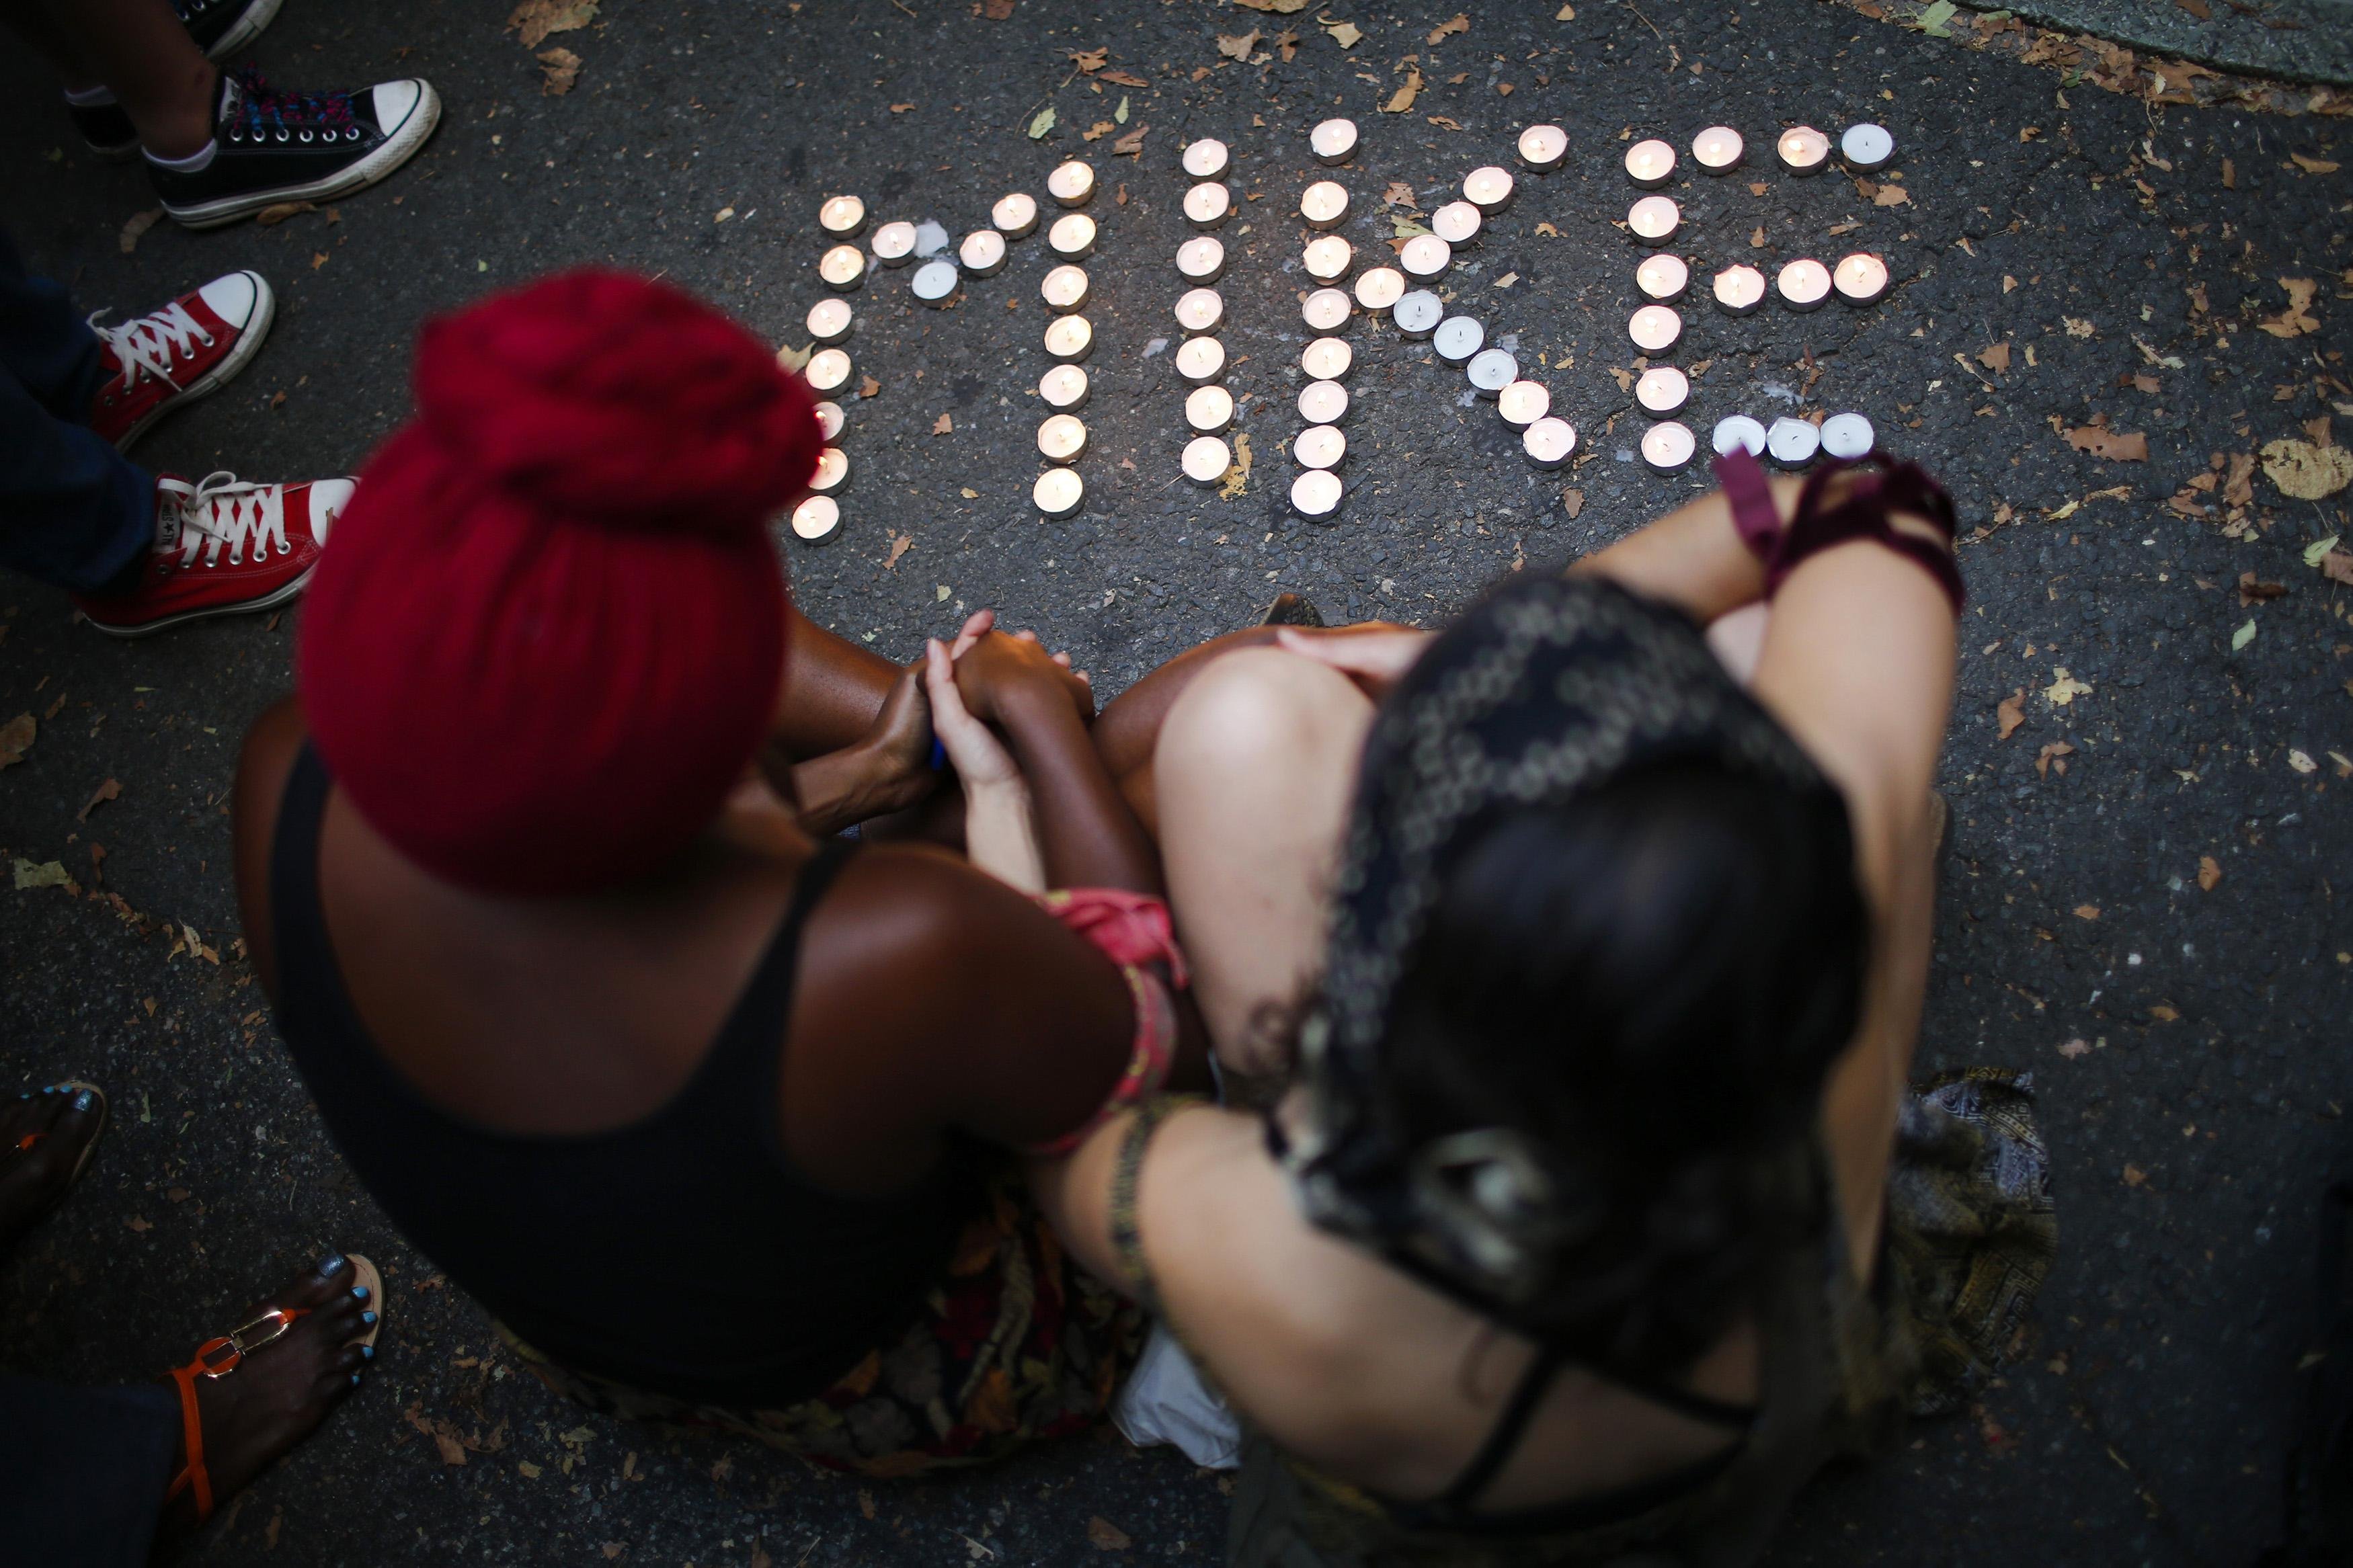 People attend a vigil to honor Michael Brown, who was shot and killed by an unnamed police officer last Saturday in Ferguson, Missouri, in Brooklyn on Aug. 14, 2014.